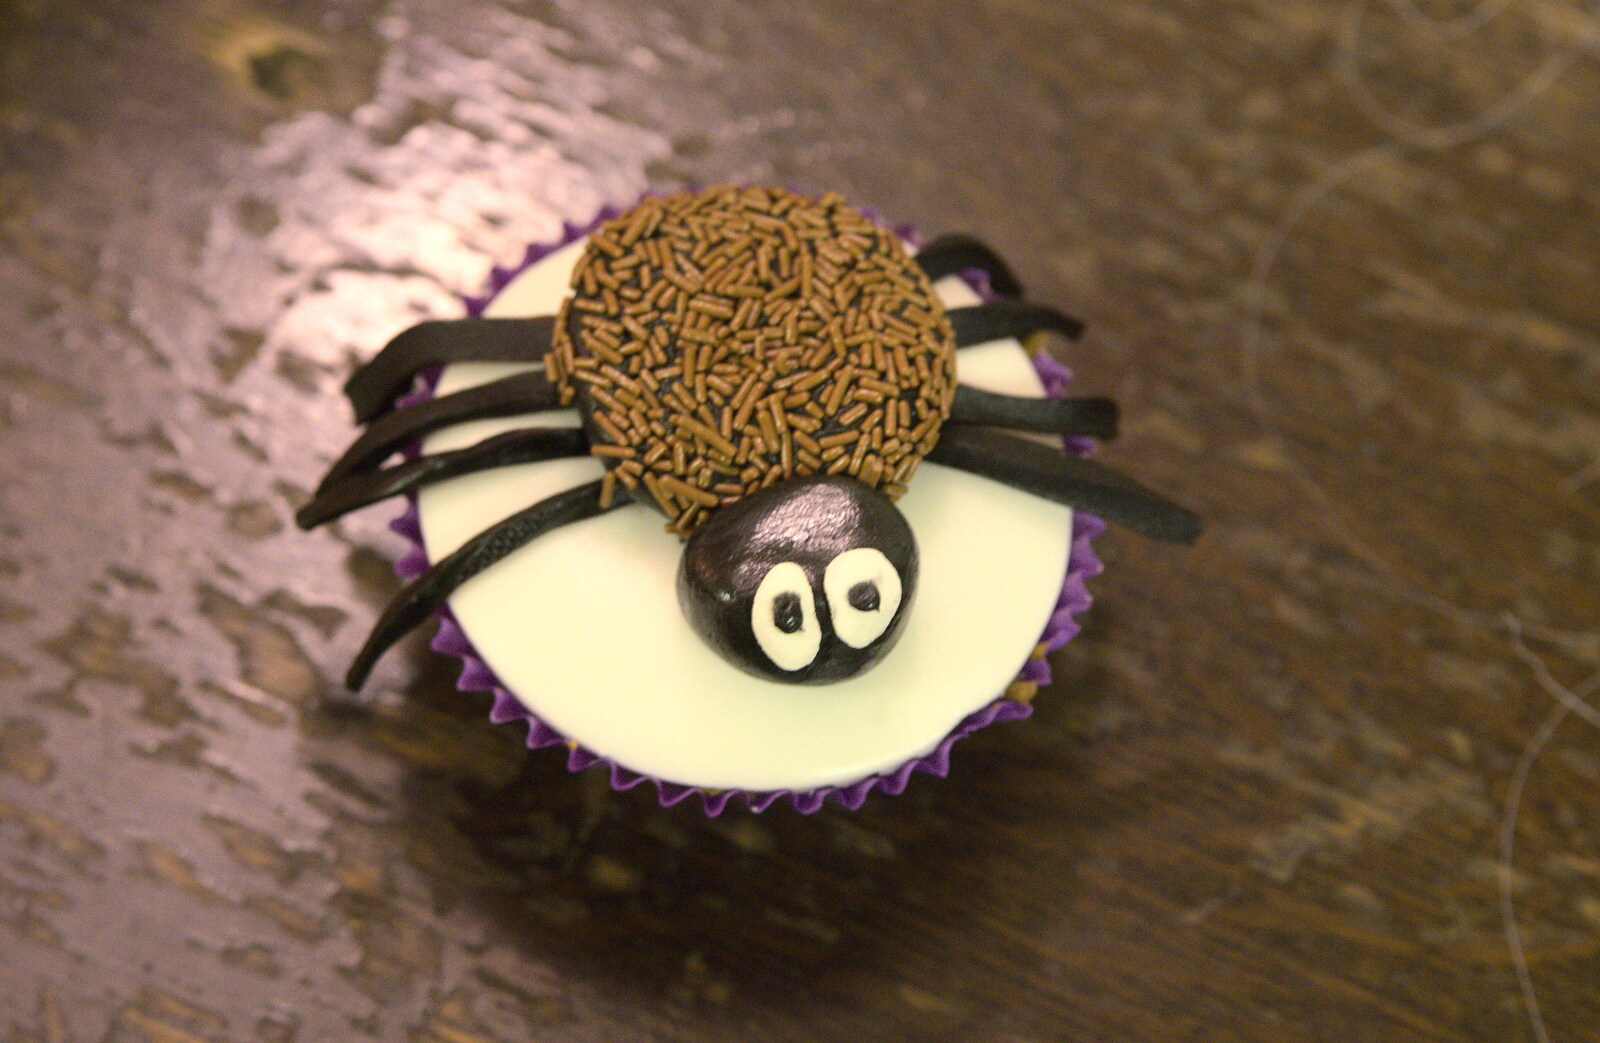 A spidery cup cake from A Halloween Party at the Village Hall, Brome, Suffolk - 31st October 2014